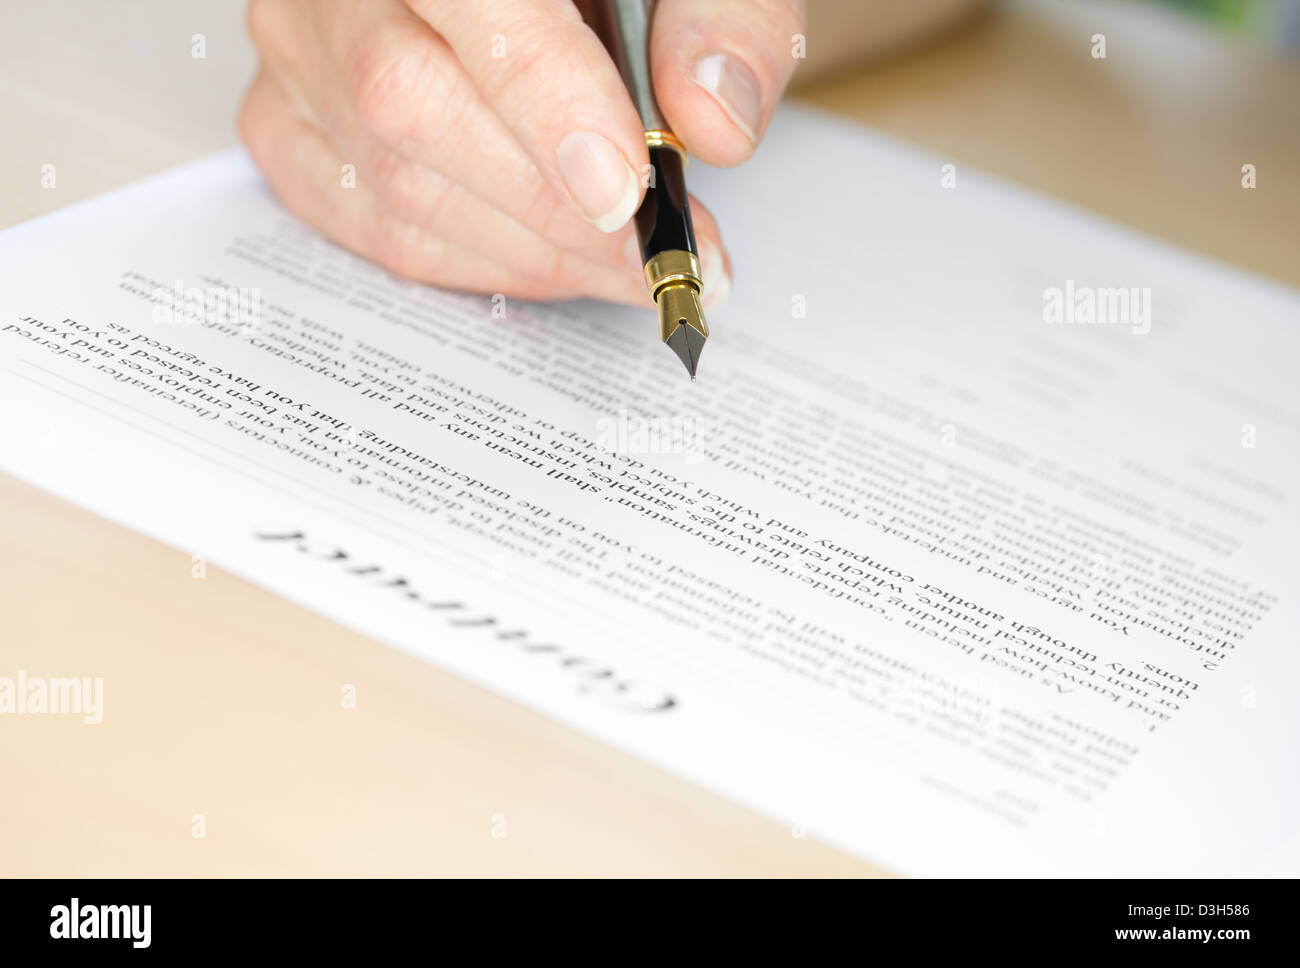 Signing a Contract with Fountain Pen Stock Photo